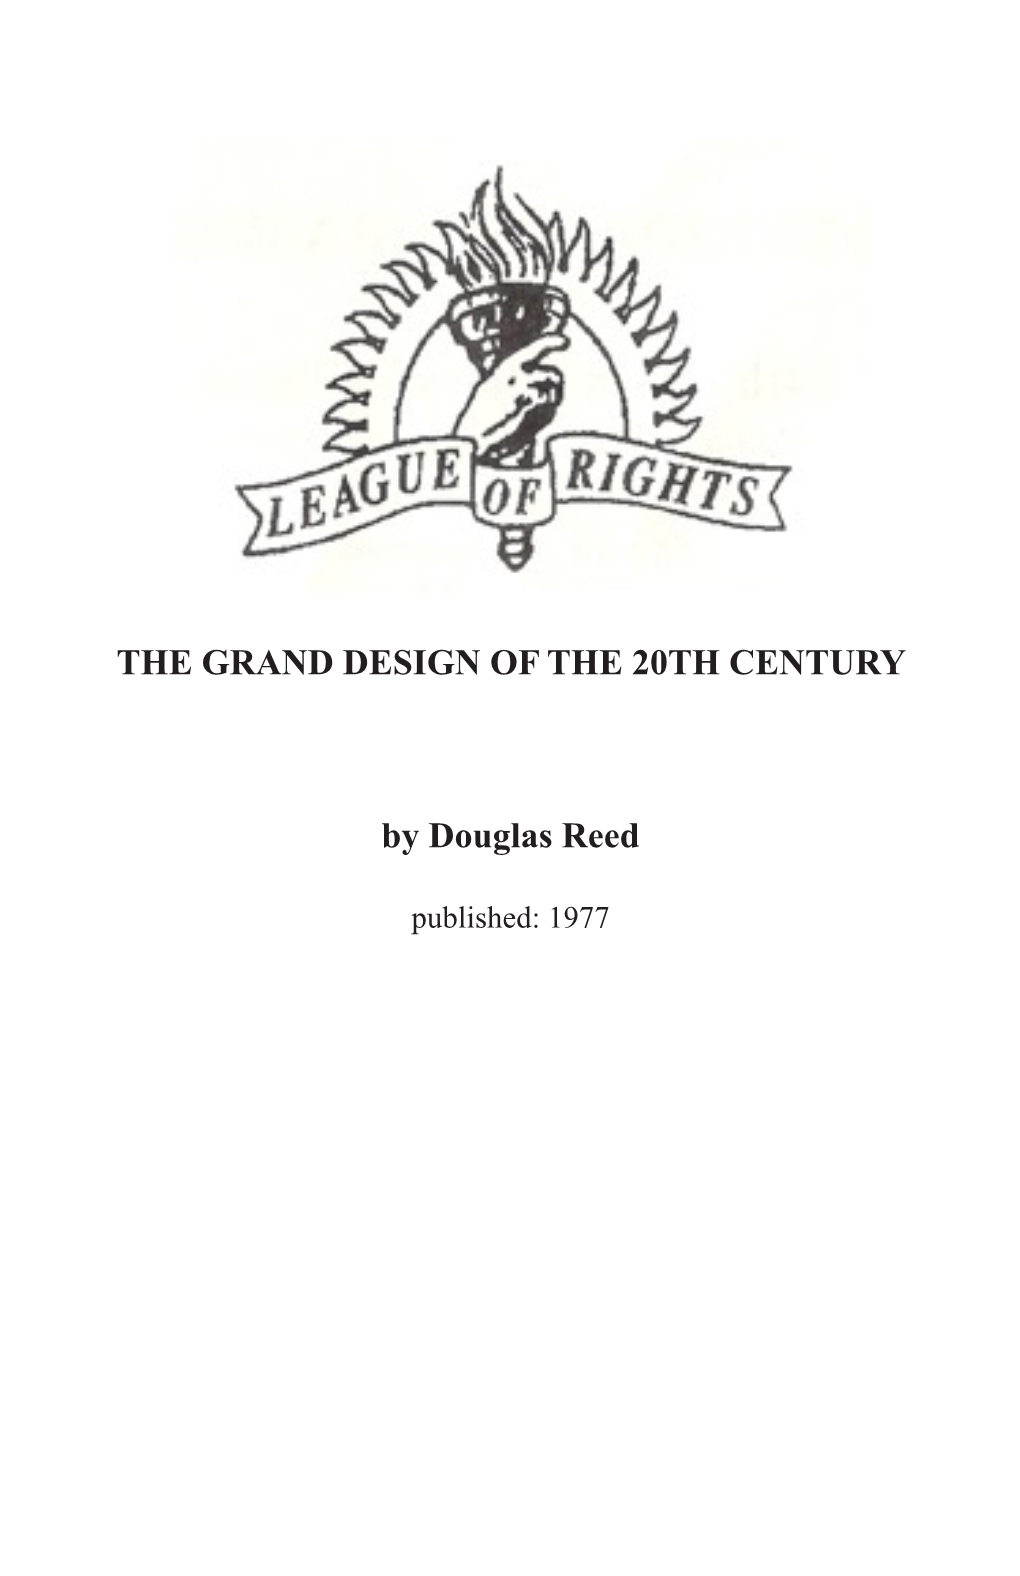 THE GRAND DESIGN of the 20TH CENTURY by Douglas Reed